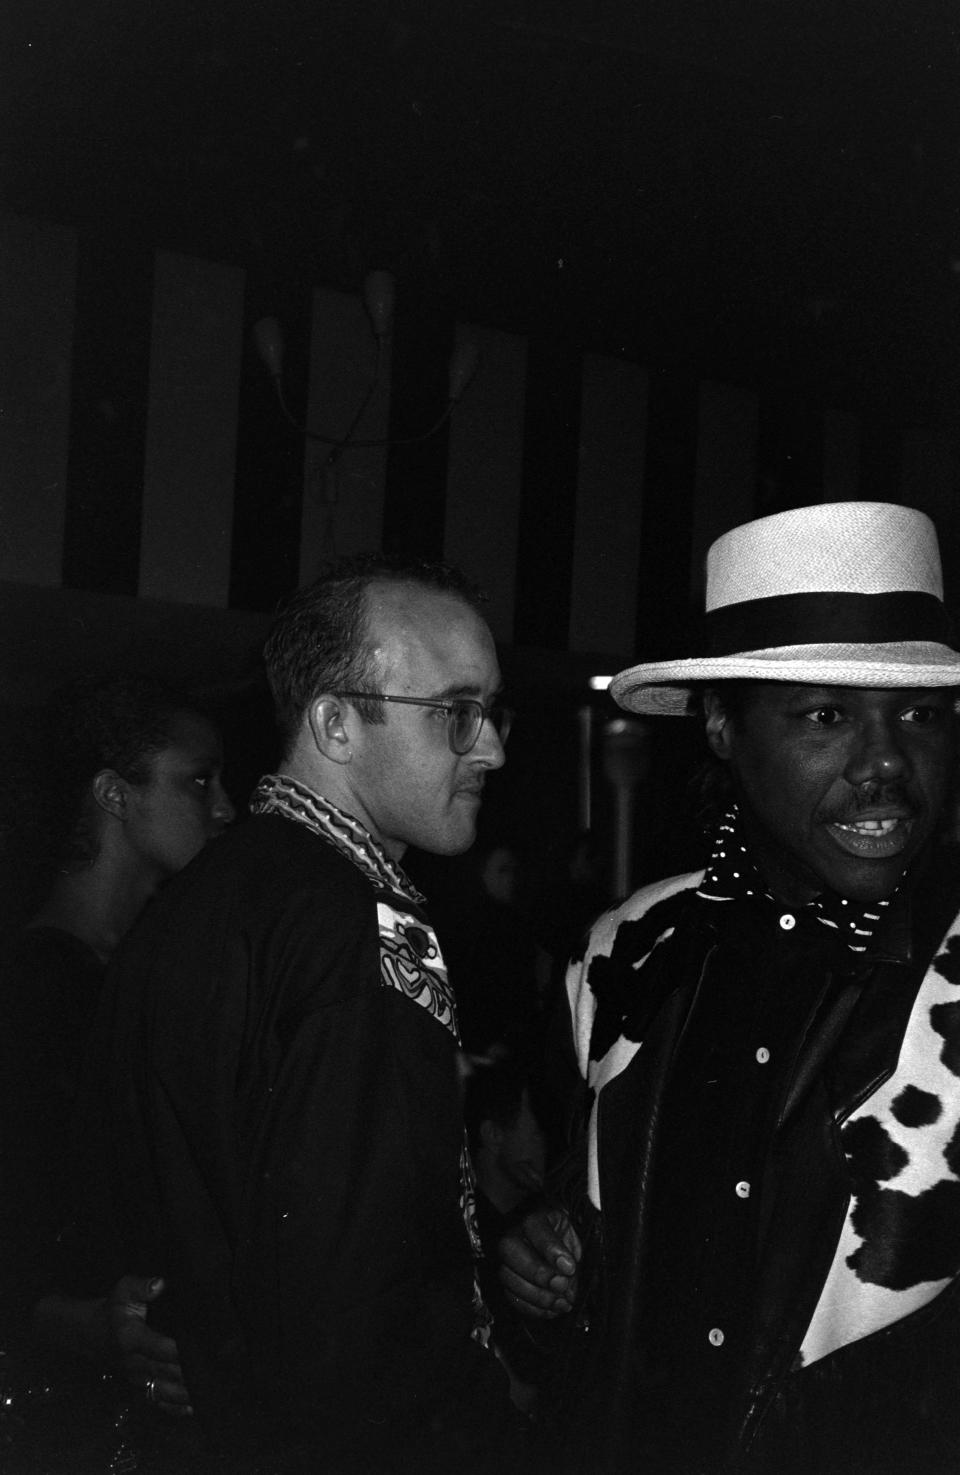 Artist Keith Haring and musician Nile Rodgers attend the “Love Ball” at Roseland Ballroom in New York, 1989. - Credit: WWD,DNR,FN